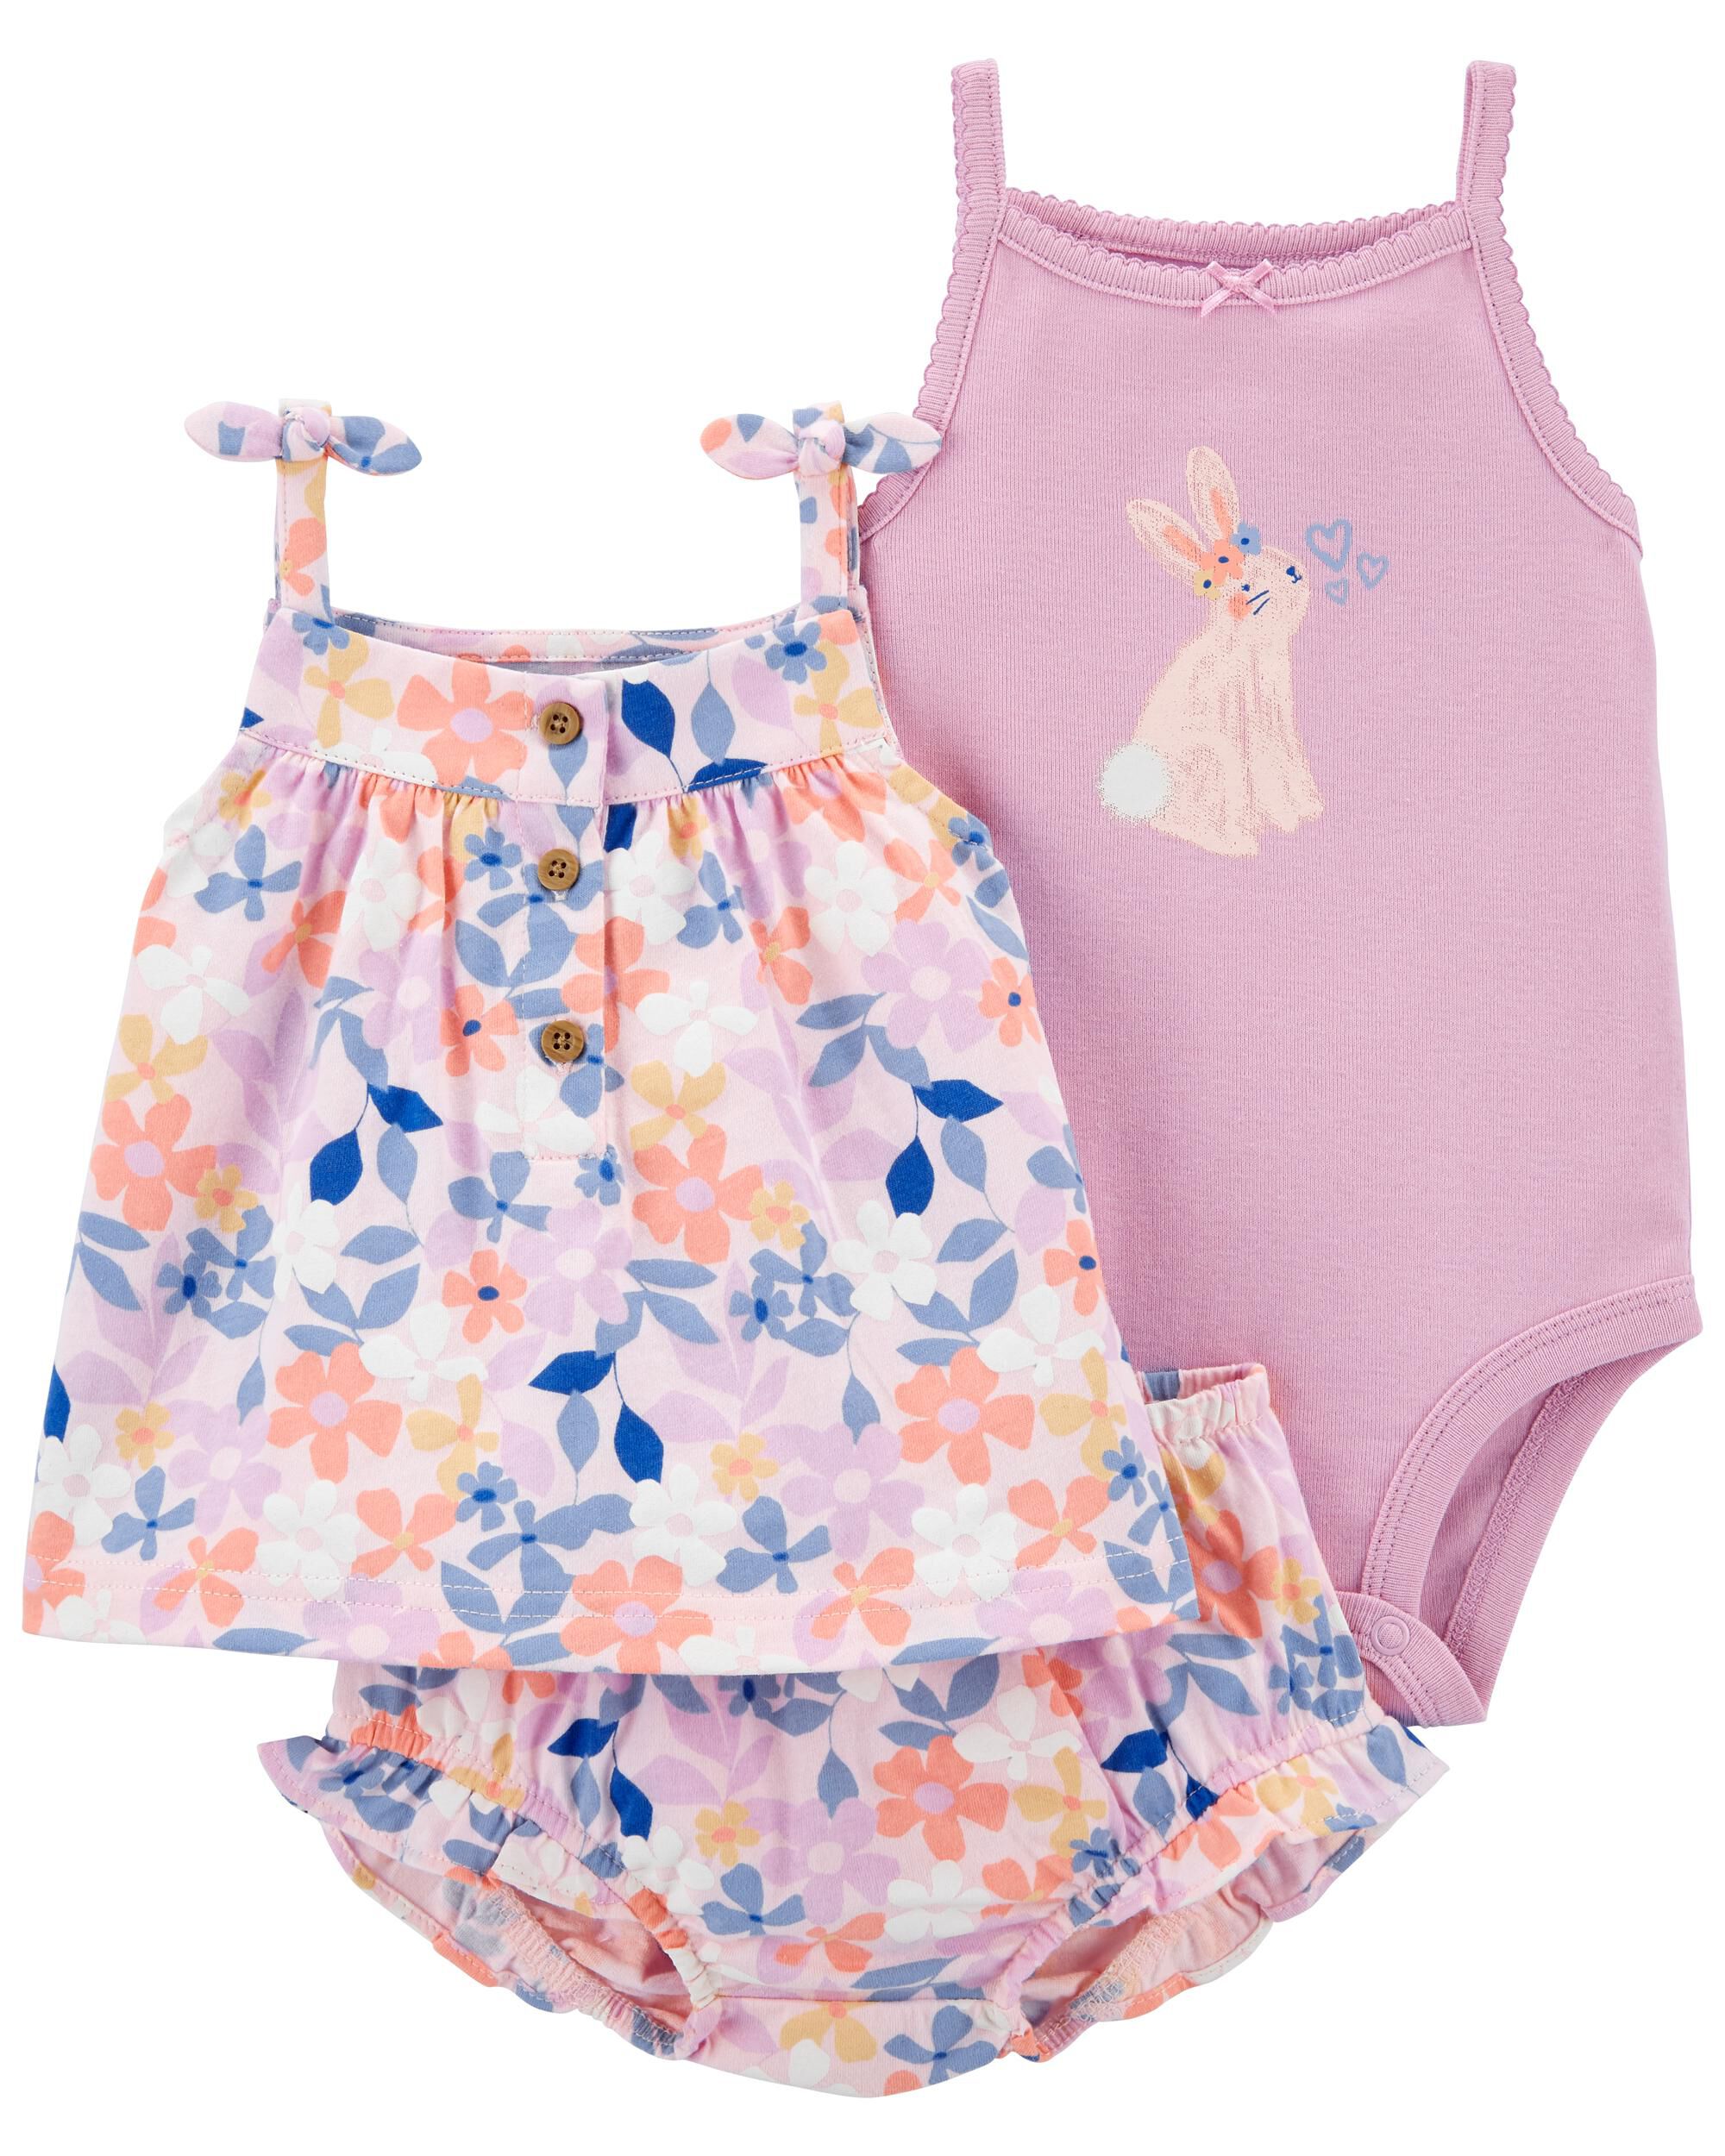 Sparkle and Shine NEW Carter’s 3-Piece Outfit Set for Baby Girls 